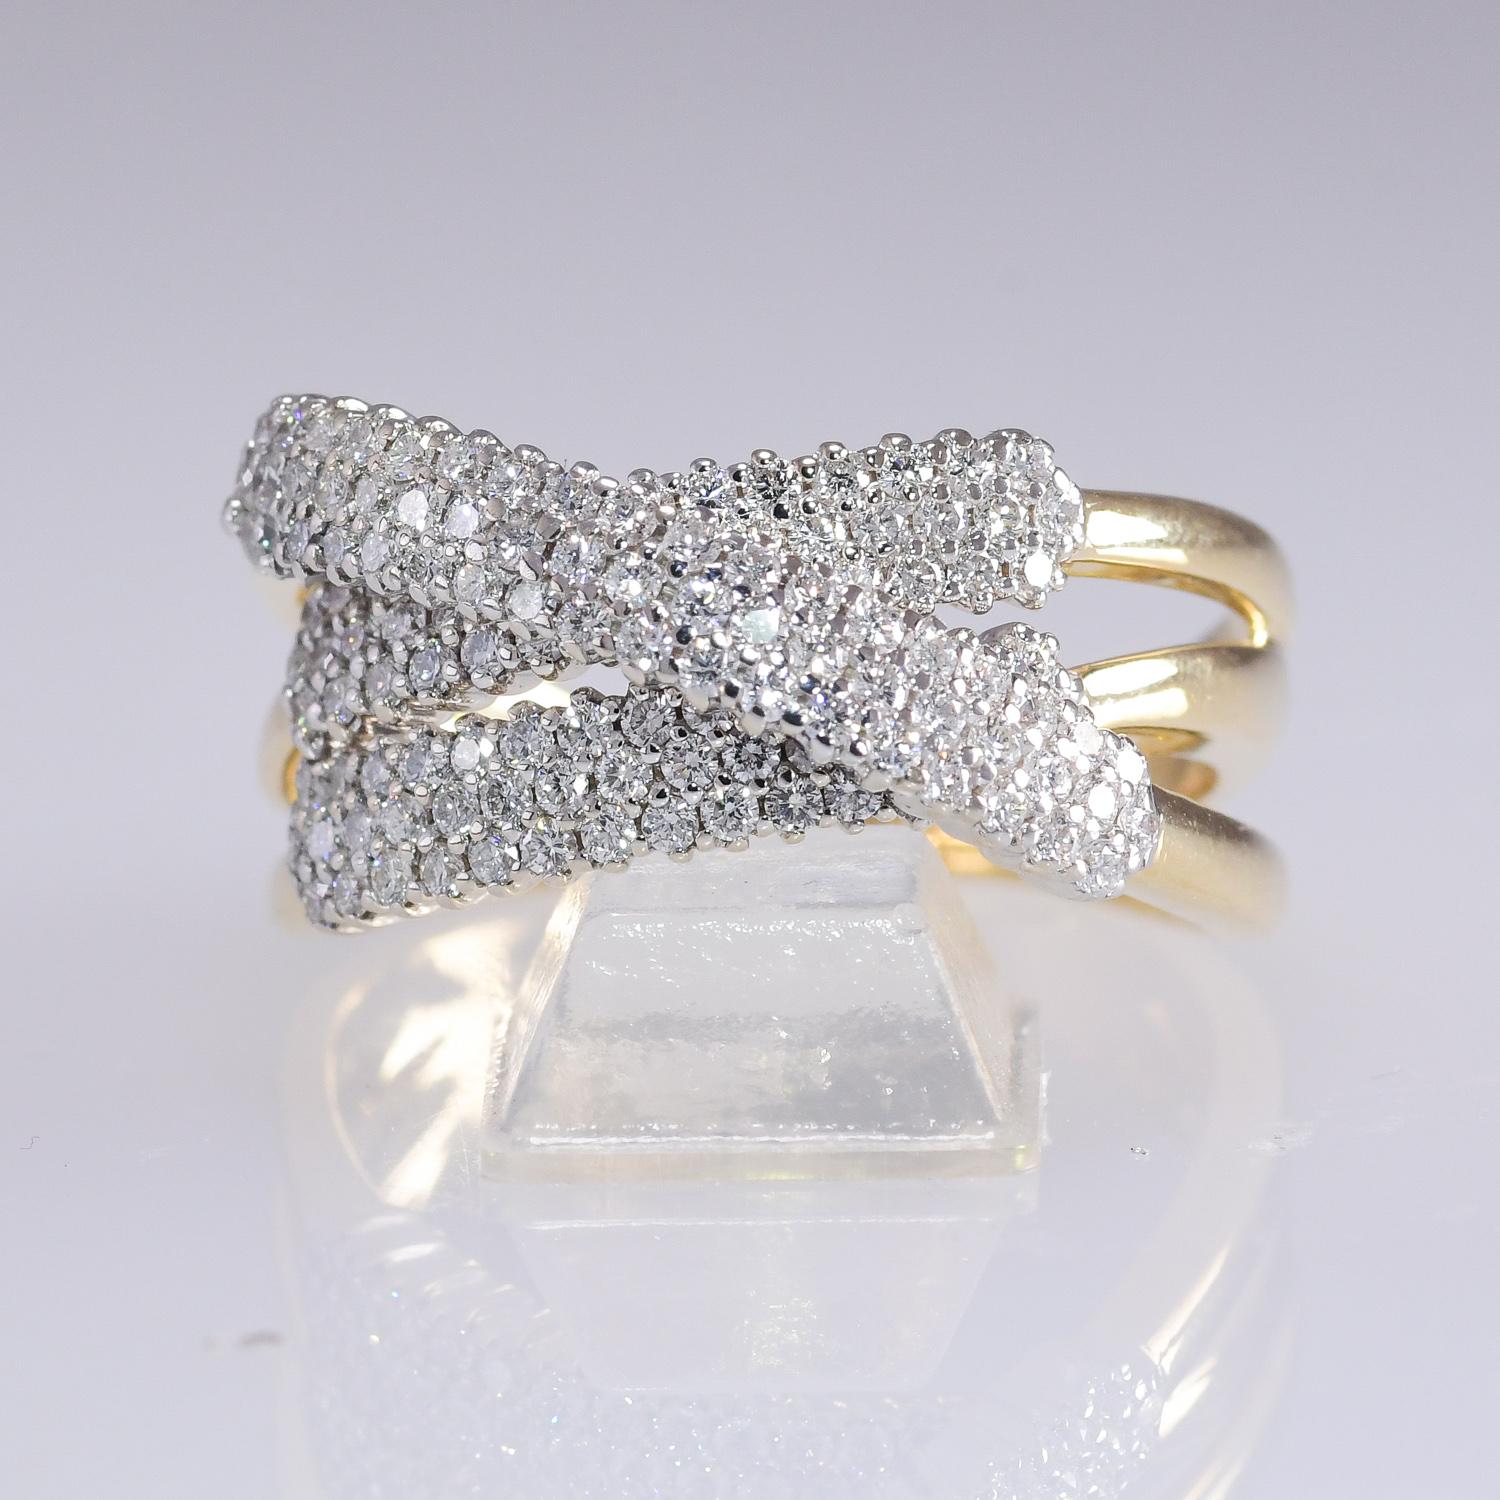 This stunning elegant Italian designed ring has three rows of diamonds with three diamonds in each row. The pave' set diamonds total 2.0 carat and are VVS2-VS2; G-H quality. The ring is crafted in 18 karat yellow gold and weighs 12.8 grams. The ring